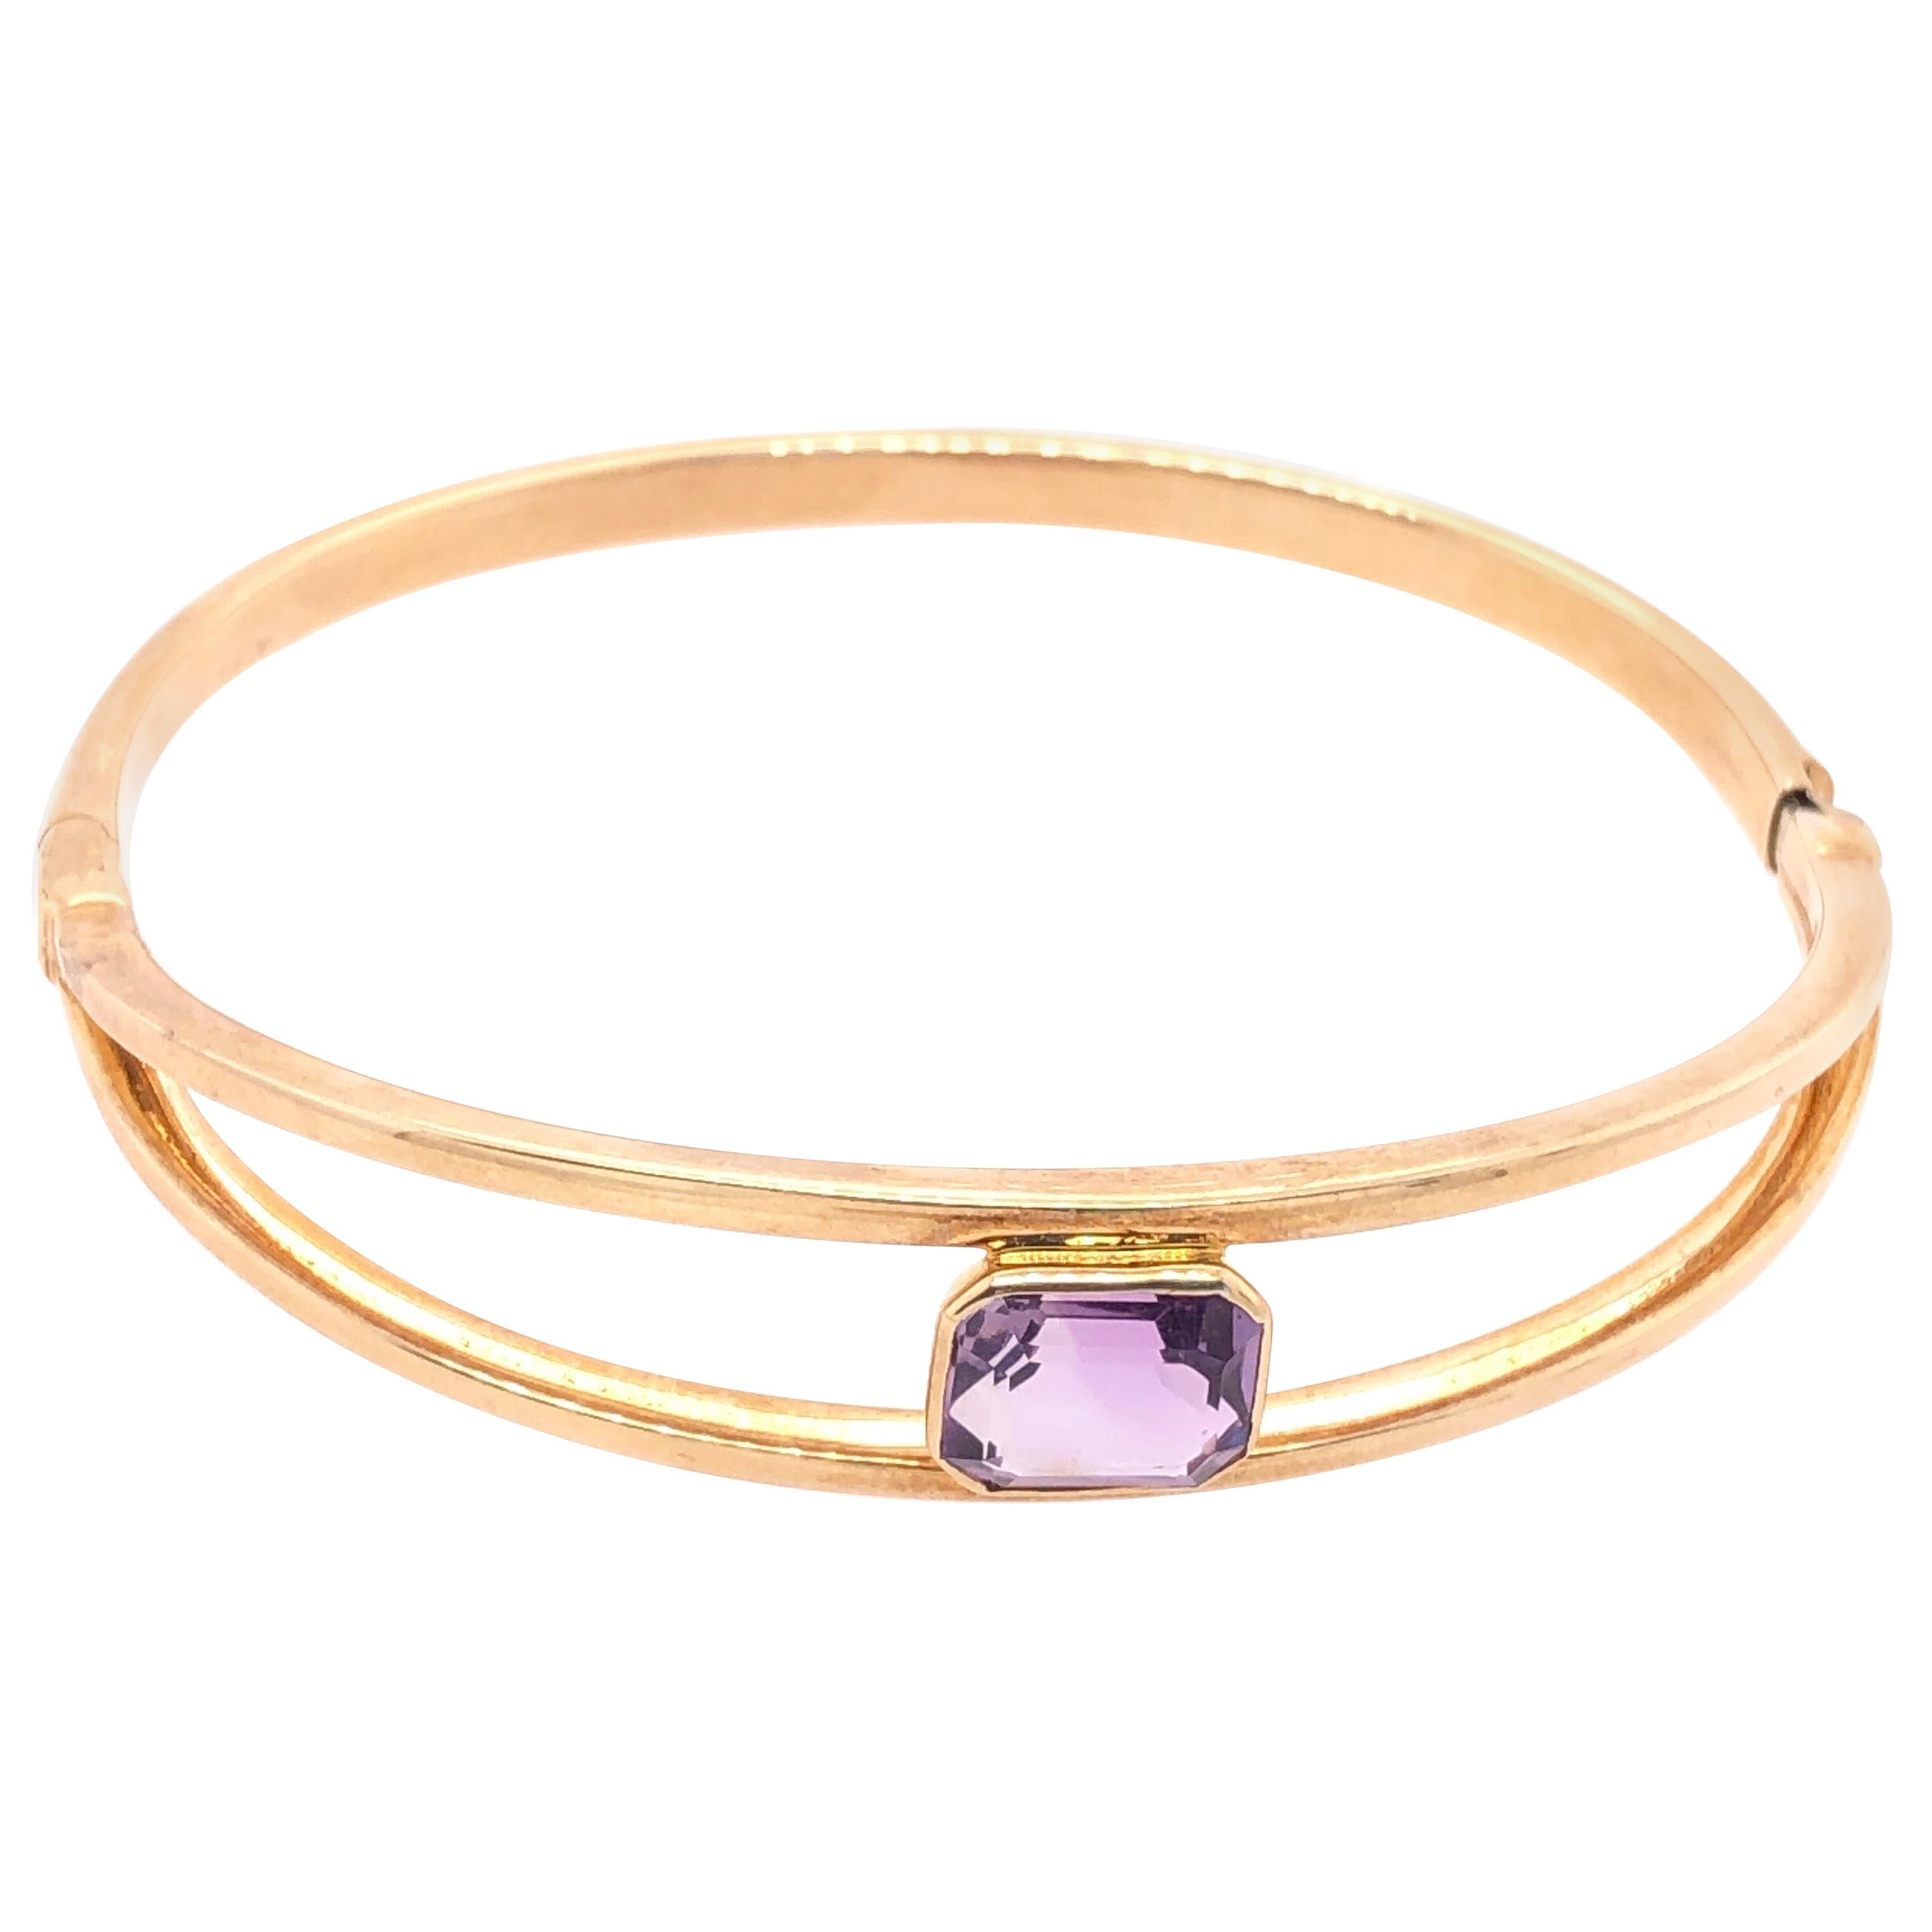 14 Karat Yellow Gold 7.8 Fancy Link Bangle with Square Amethyst Solitaire